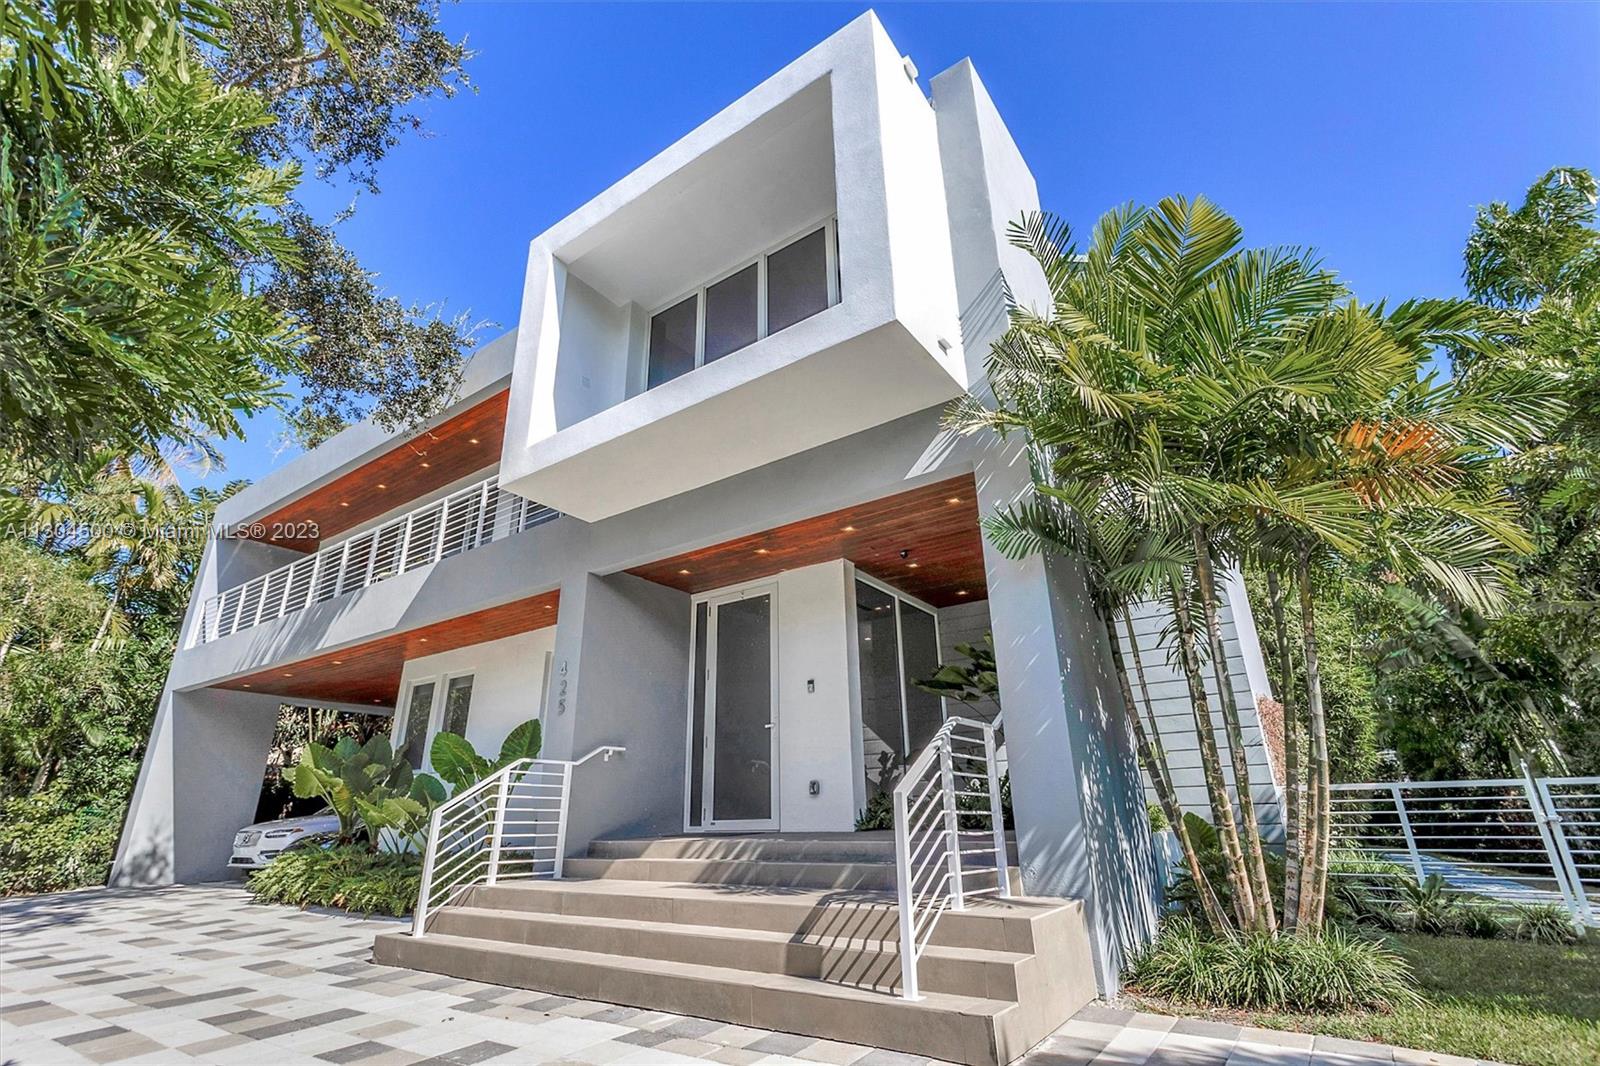 Spectacular contemporary home in one of Key Biscayne's most desired streets. Built in 2020, this house features 7 bedrooms, 7 bathrooms plus 2 more powder rooms and sits on an oversized 9,258 sqft lot. Stylishly upgraded with custom built-ins and masterfully designed to integrate indoor and outdoor spaces. Open floor plan brings in lots of natural light. Enjoy the beautiful views from the rooftop terrace or one of the upstairs galleries. Beautifully landscaped garden, heated saltwater pool, brand new summer kitchen and cabana bathroom make this the perfect home to entertain. Elevator connects all three floors. Open garage features an EV charging station. Driveway fits several cars.